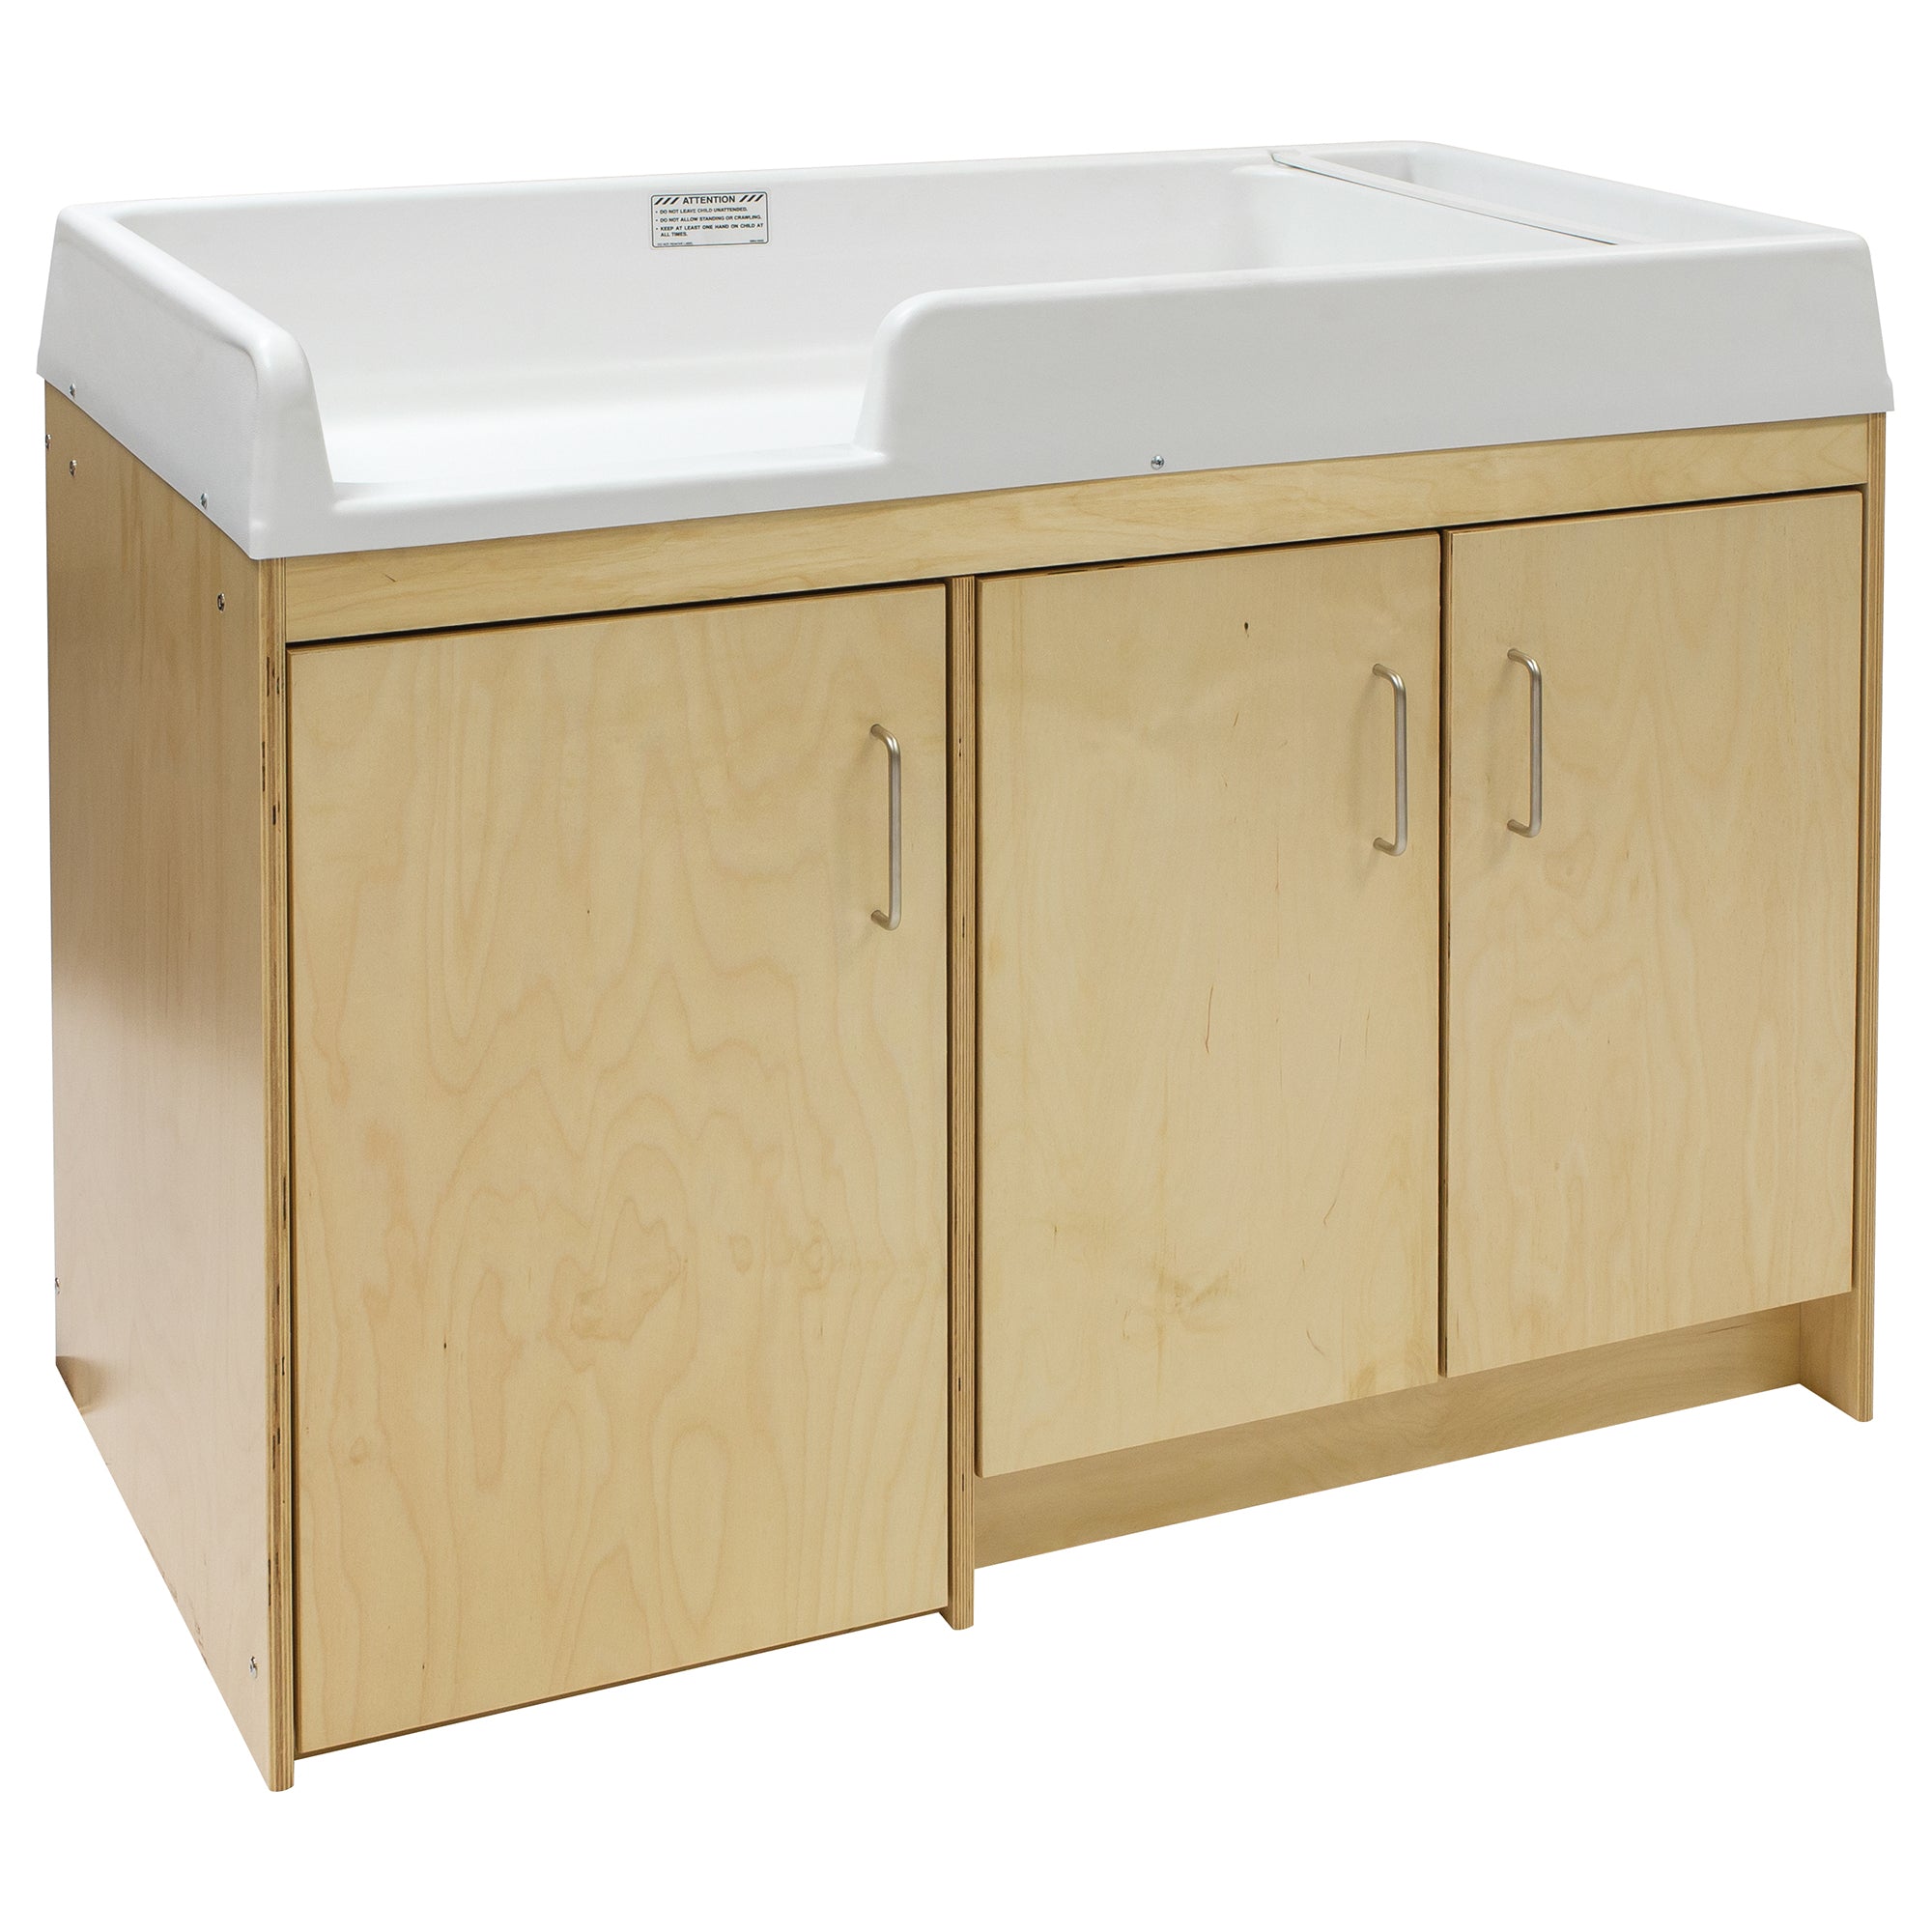 Birch Plywood Infant Changing Table with Three Wooden Lockable Doors